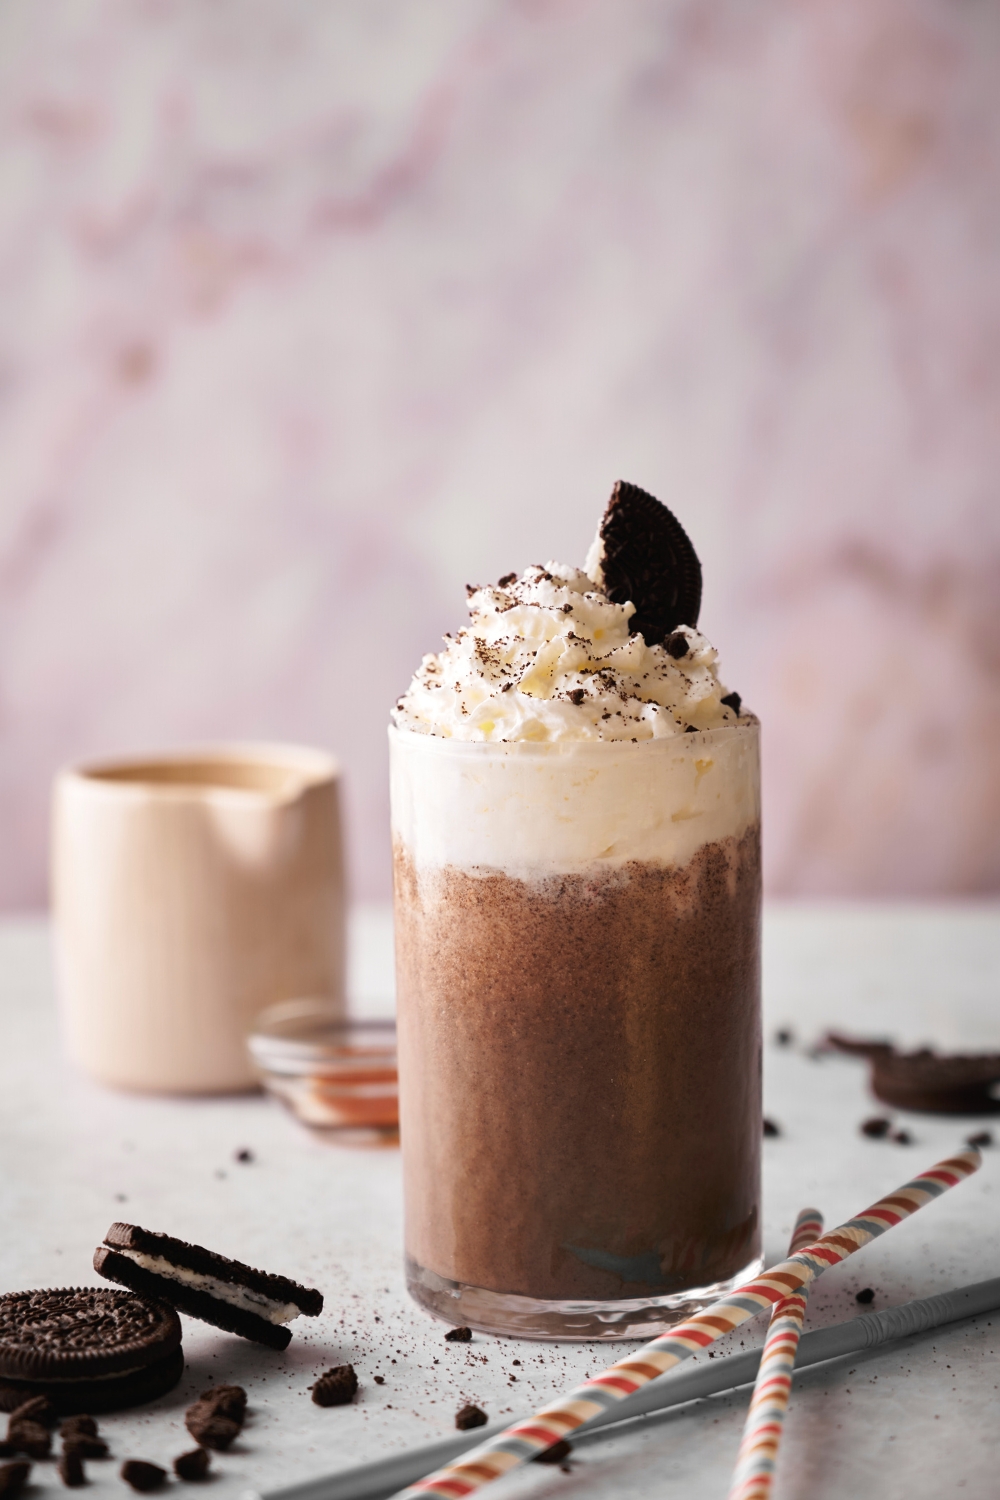 A glass that is filled with an Oreo milkshake with whipped cream on top.